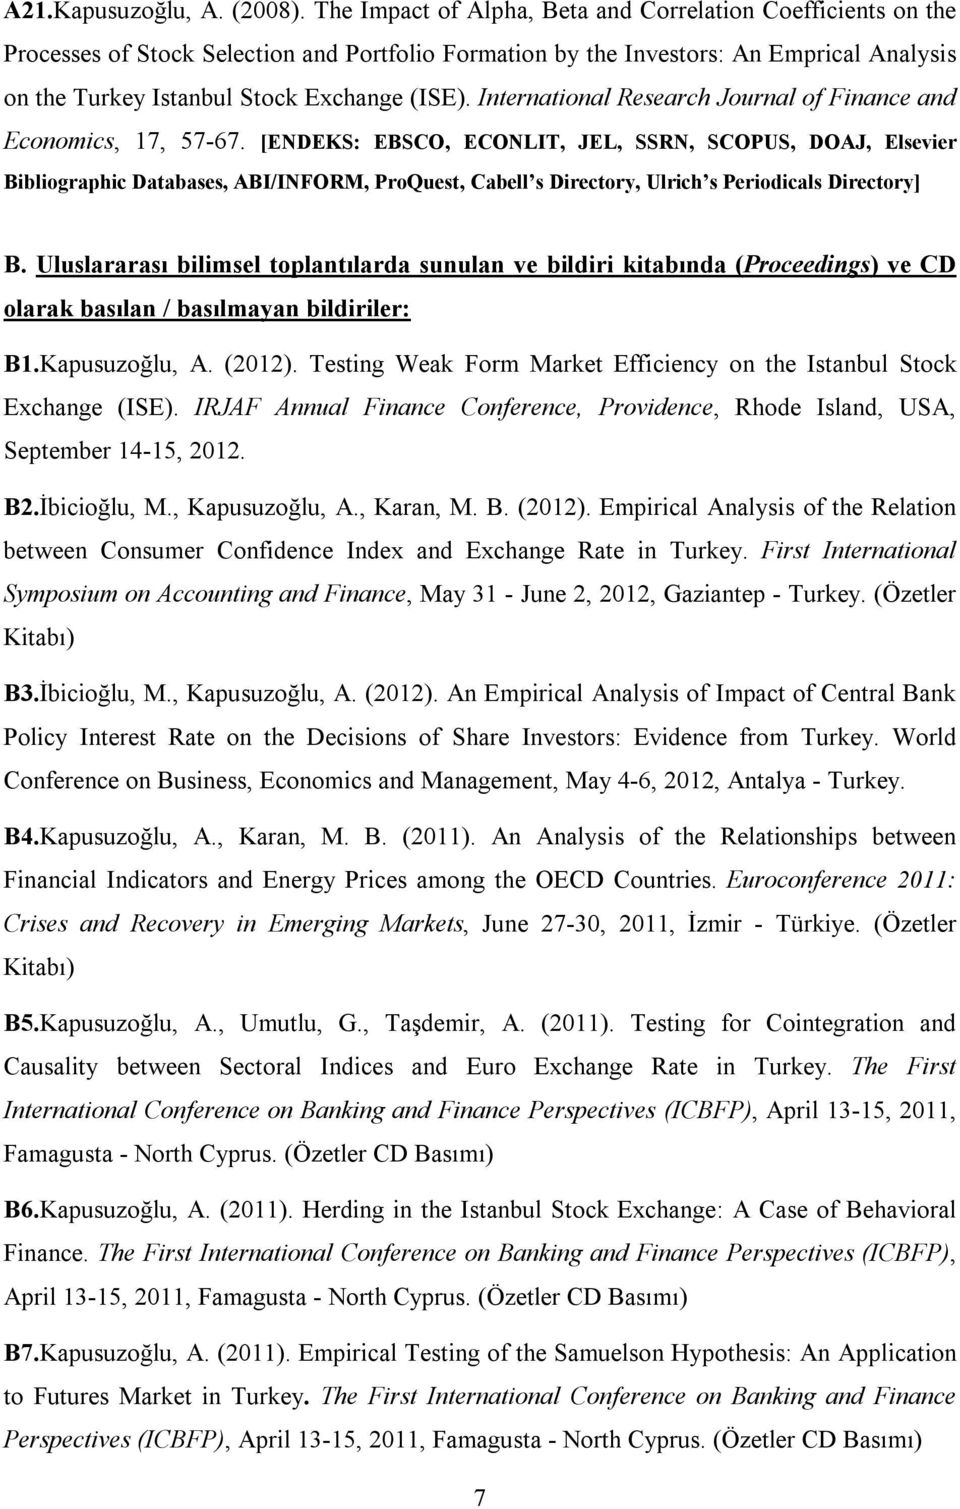 International Research Journal of Finance and Economics, 17, 57-67.